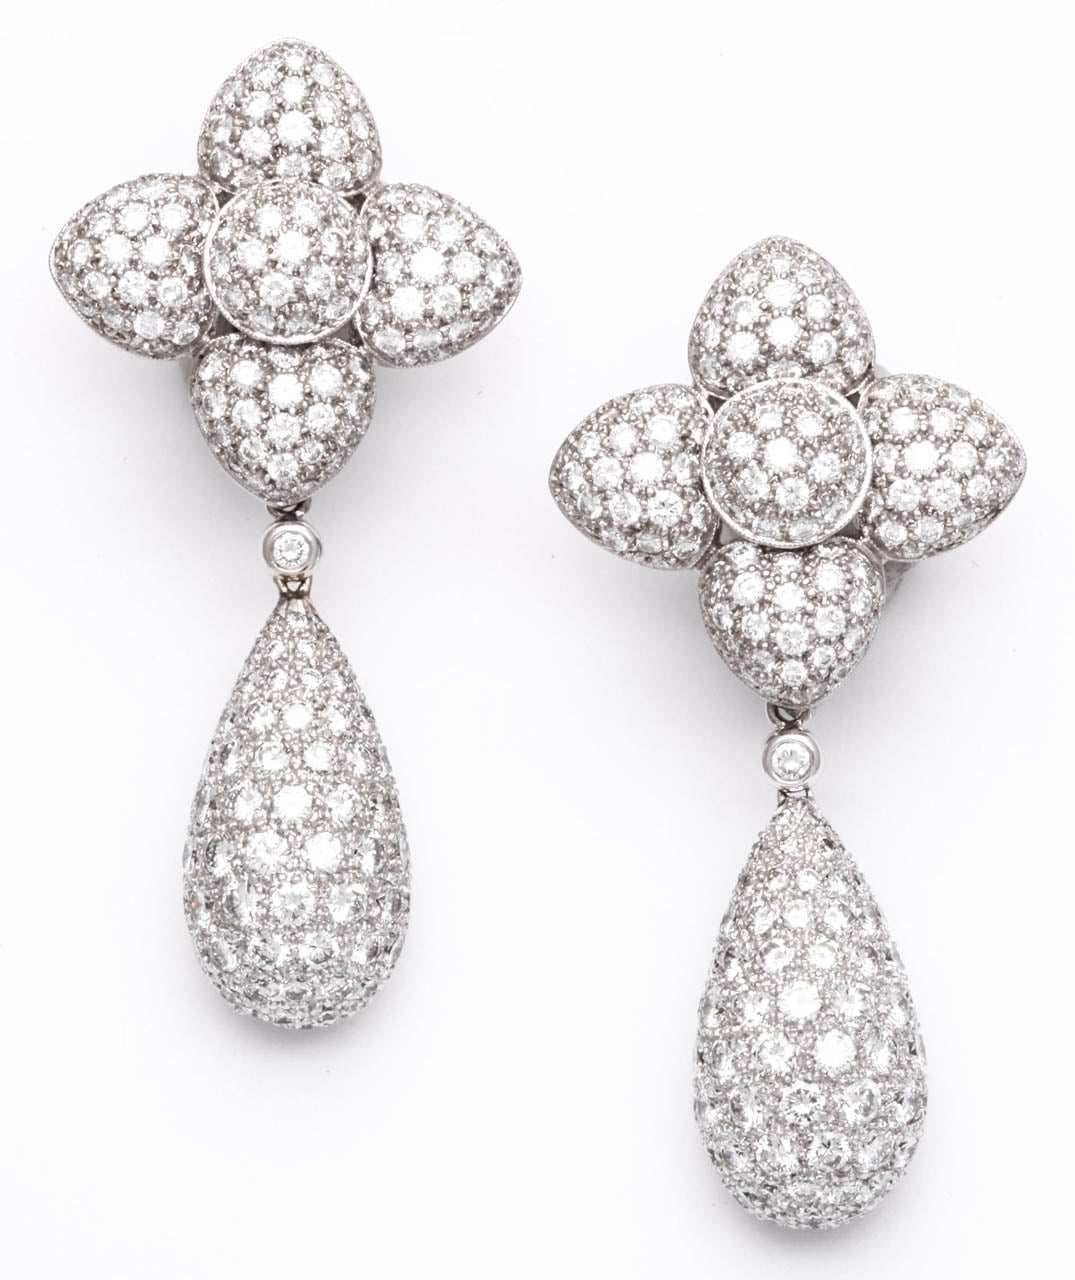 White Gold Diamond Flower Dangle Day Night Earrings. 
Total weight of diamonds - 16ct approx. 
Length - 2 1/8